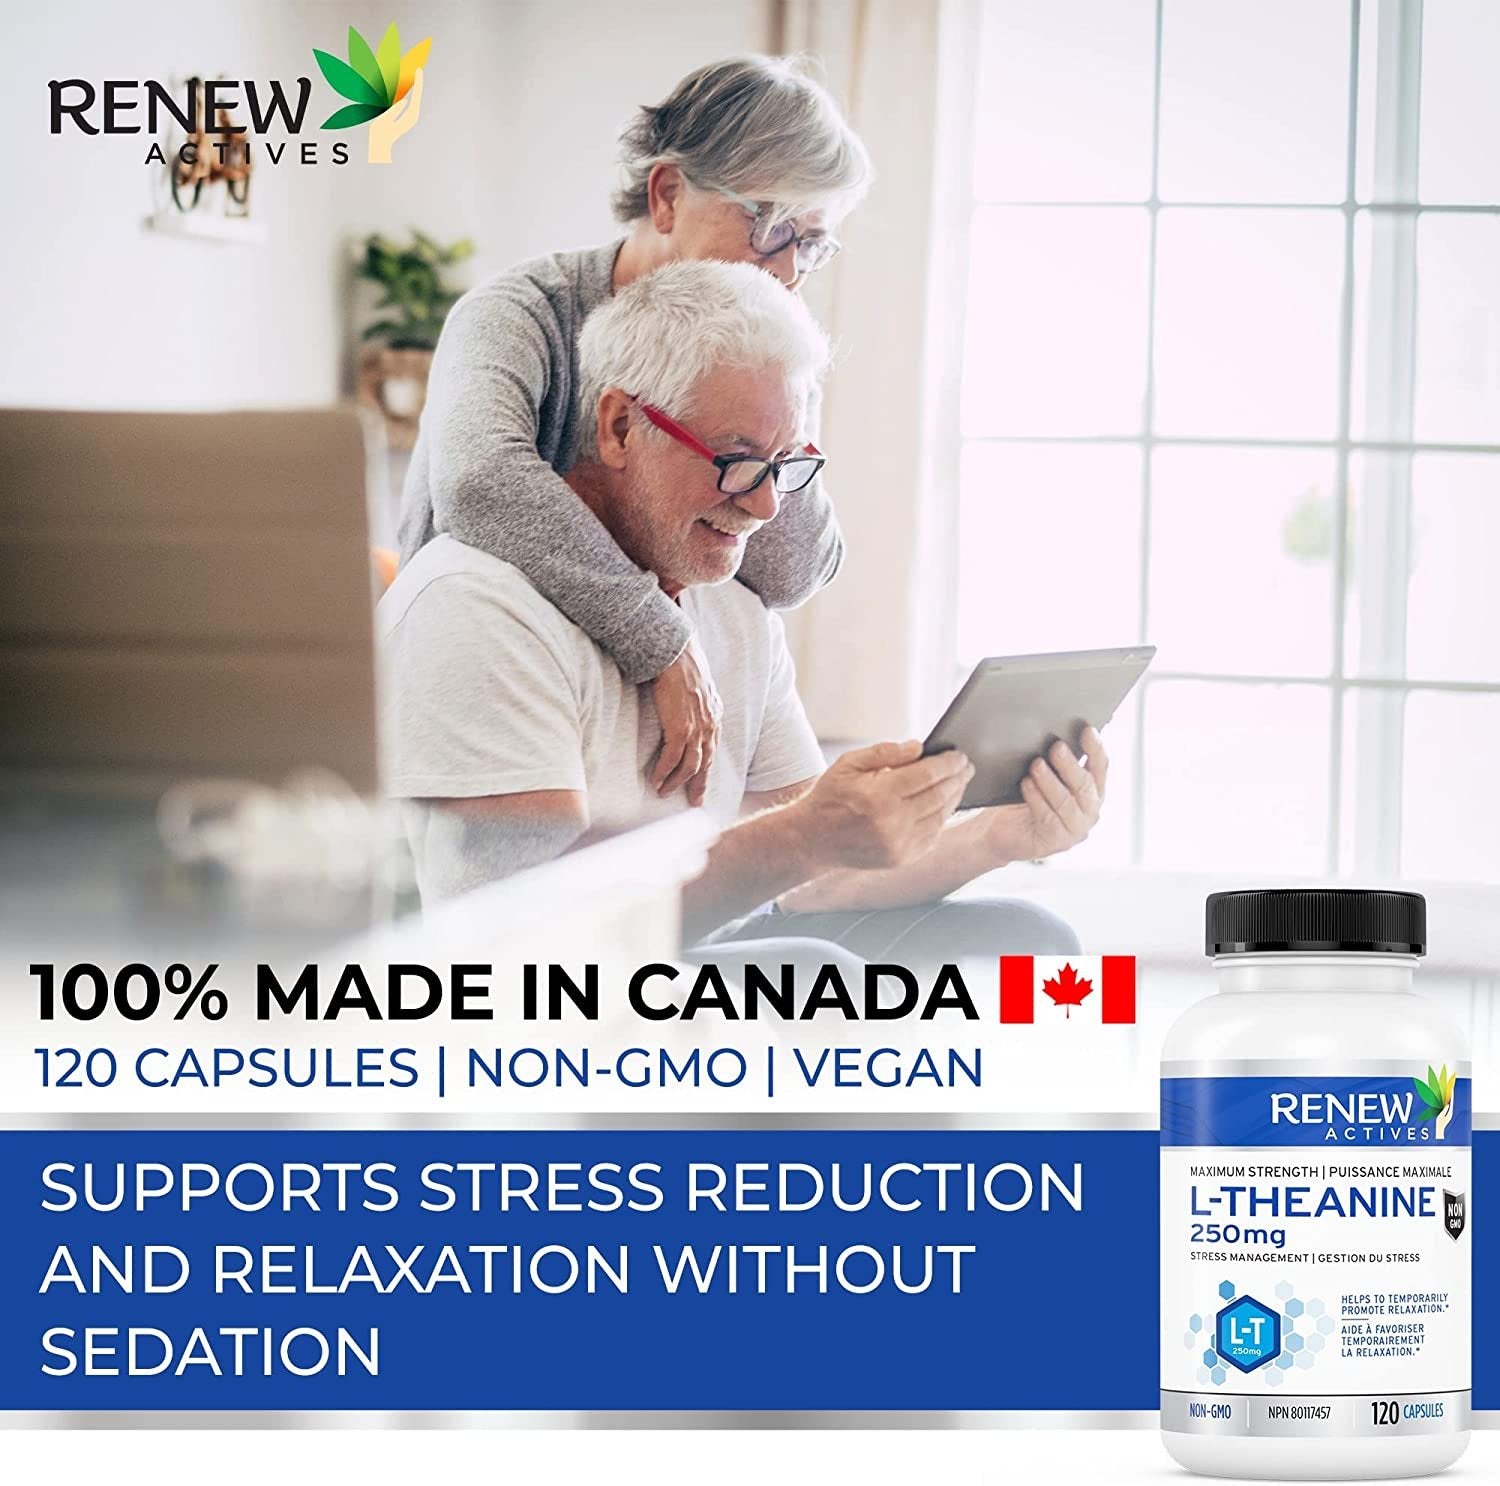 Renews Active L-Theanine Supplement, 250mg